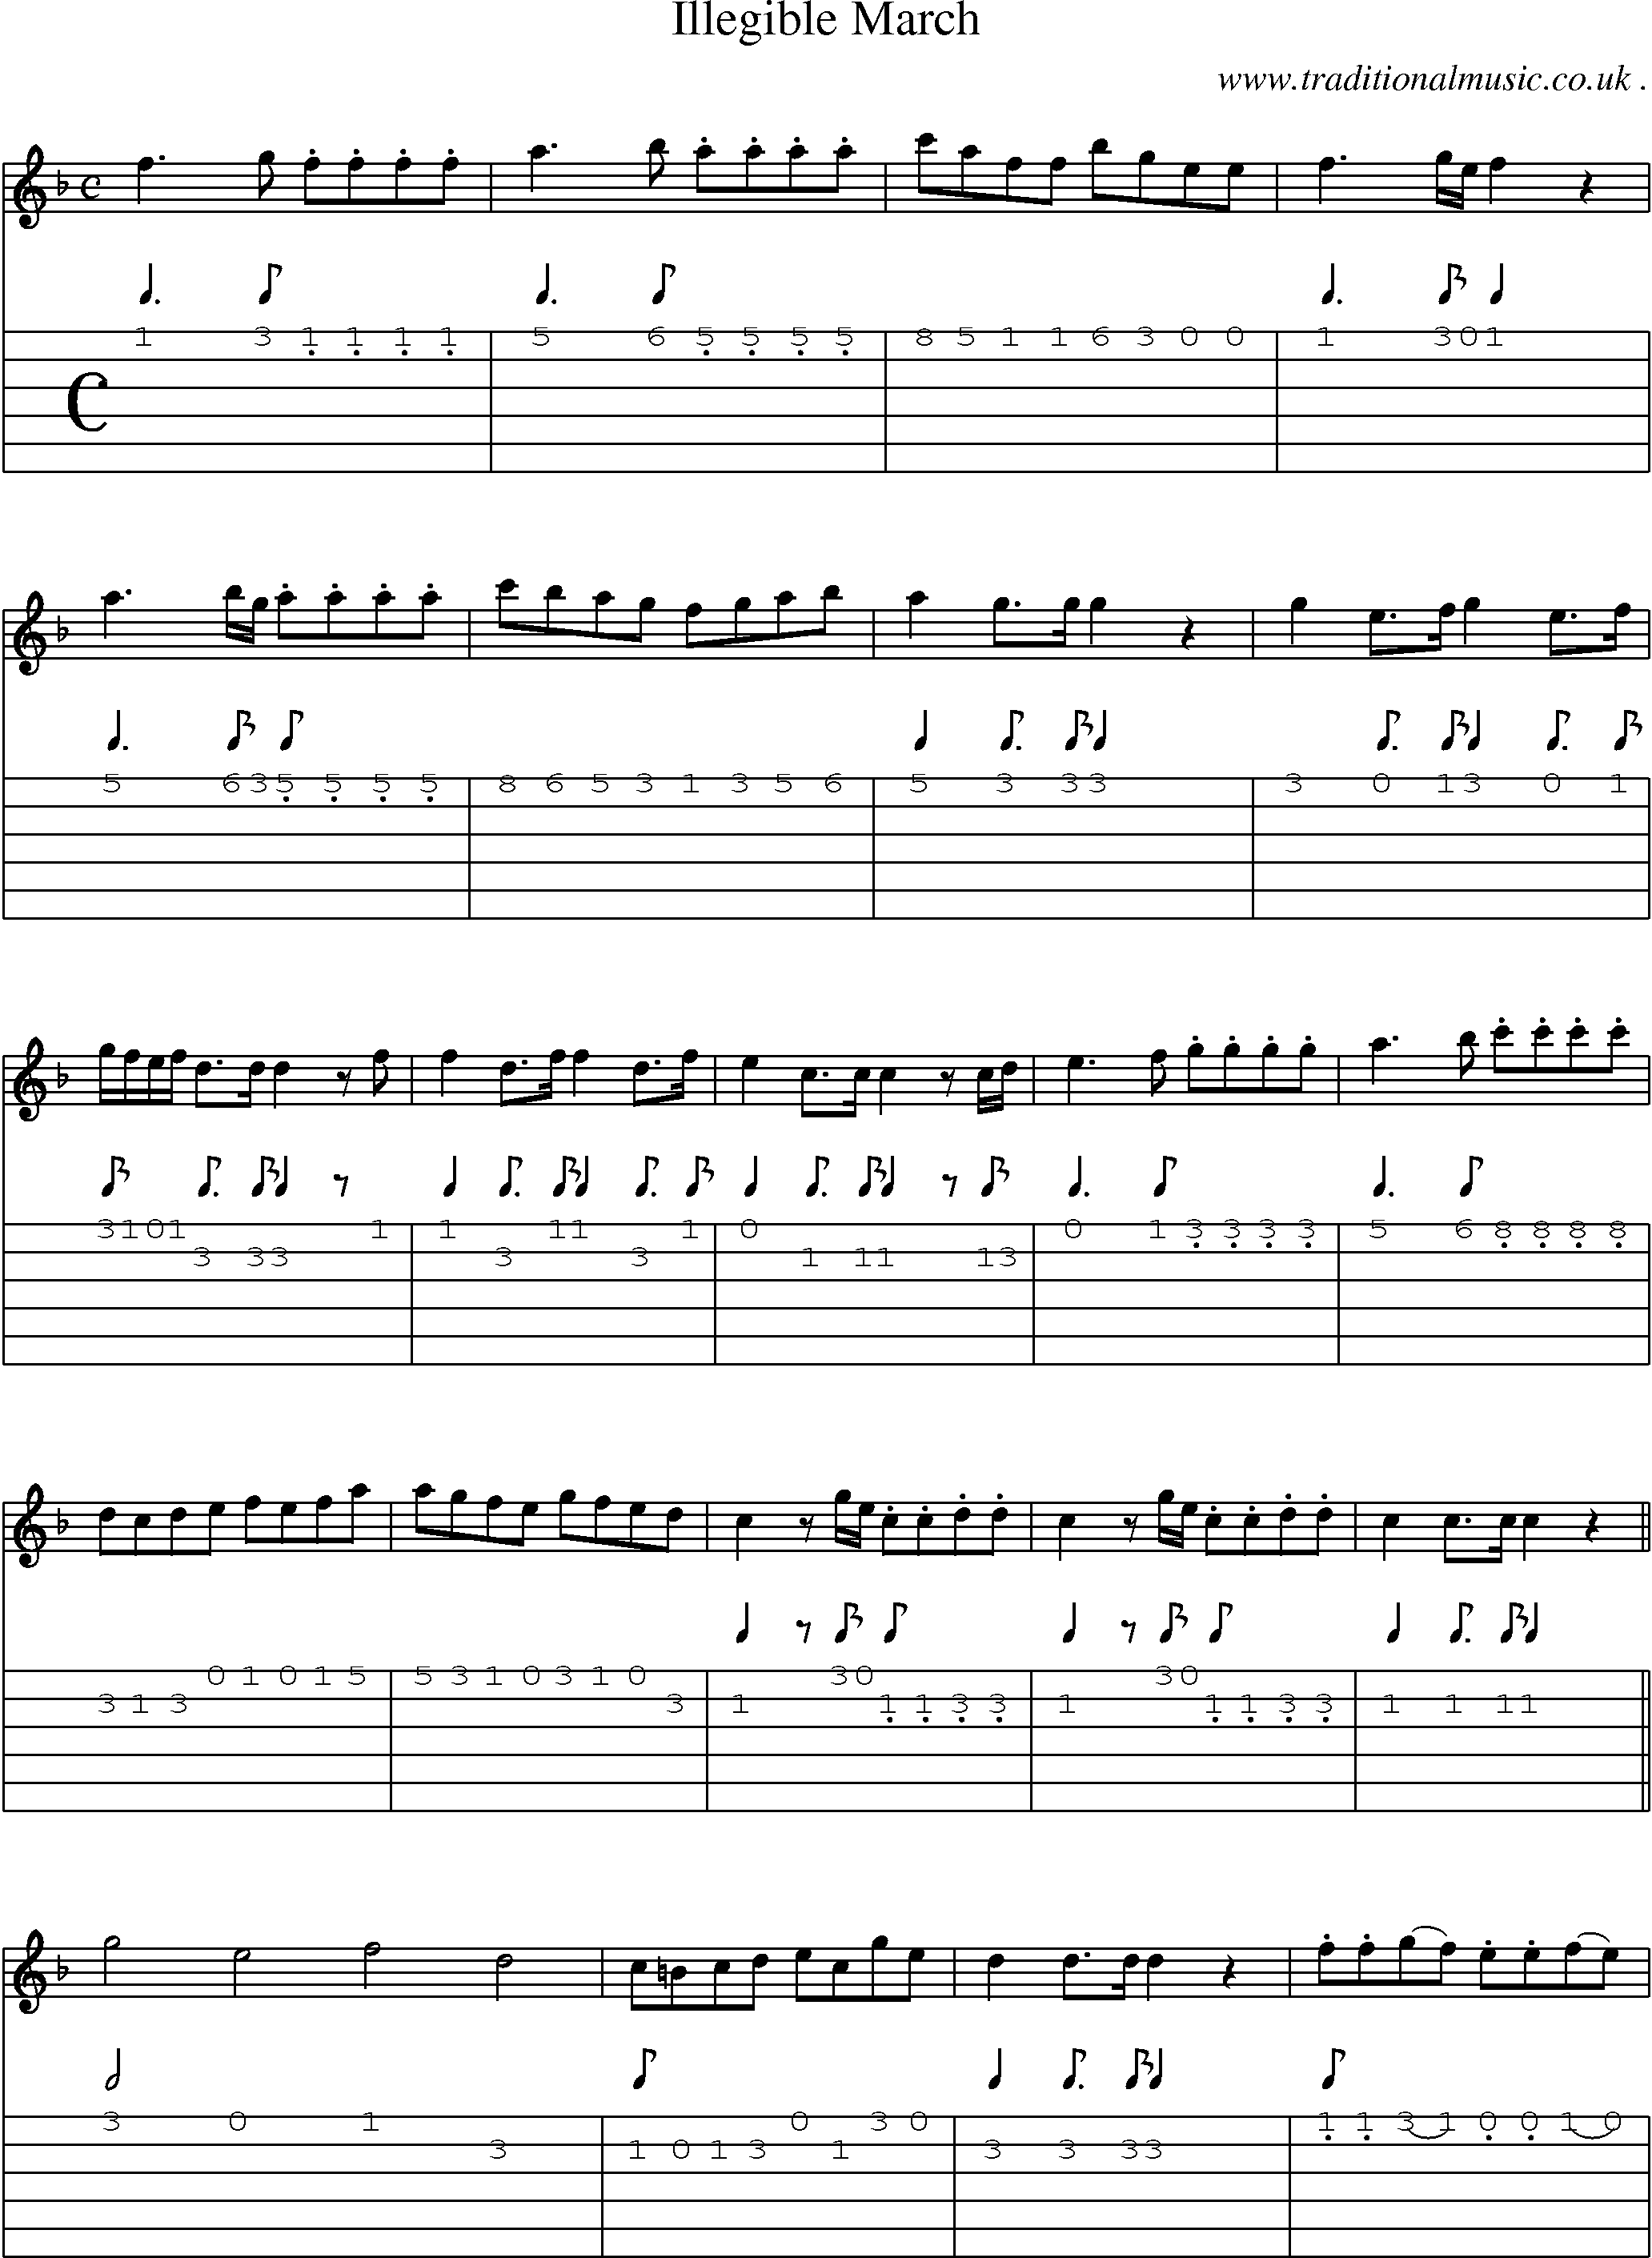 Sheet-Music and Guitar Tabs for Illegible March